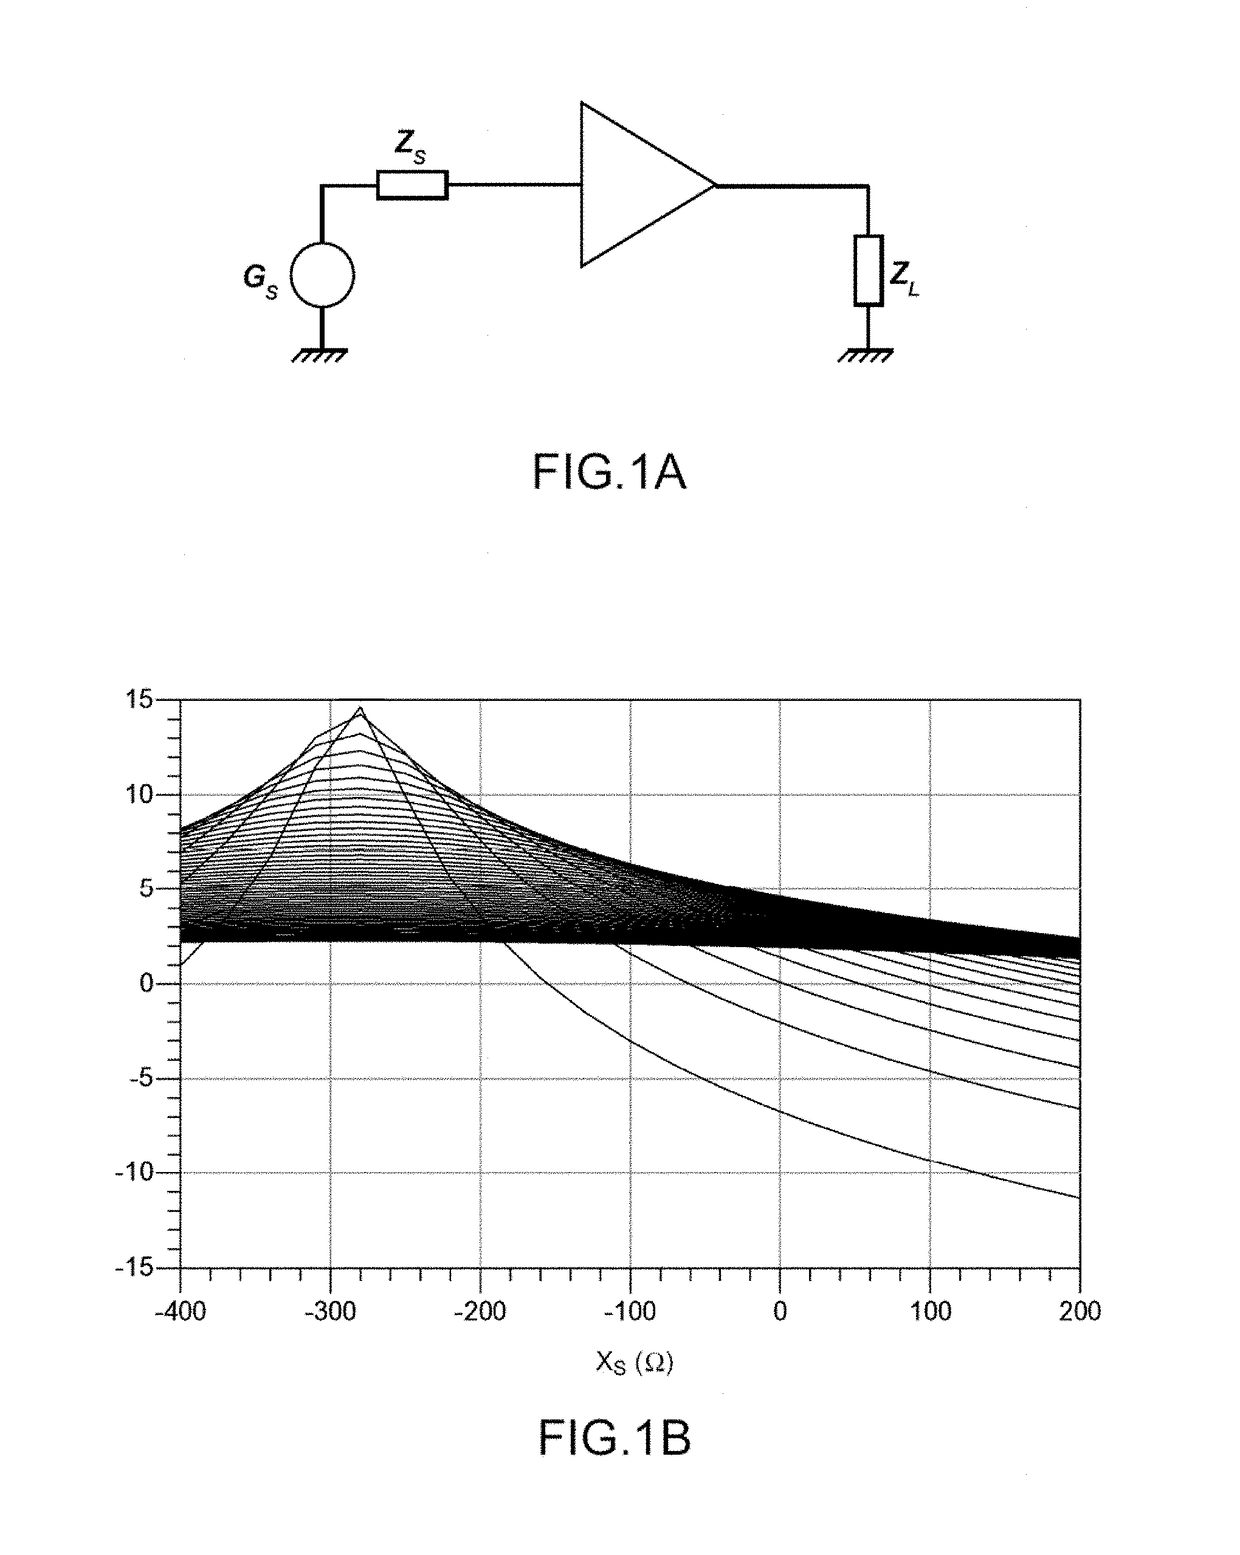 Automatic impedance matching for a radiofrequency reception chain